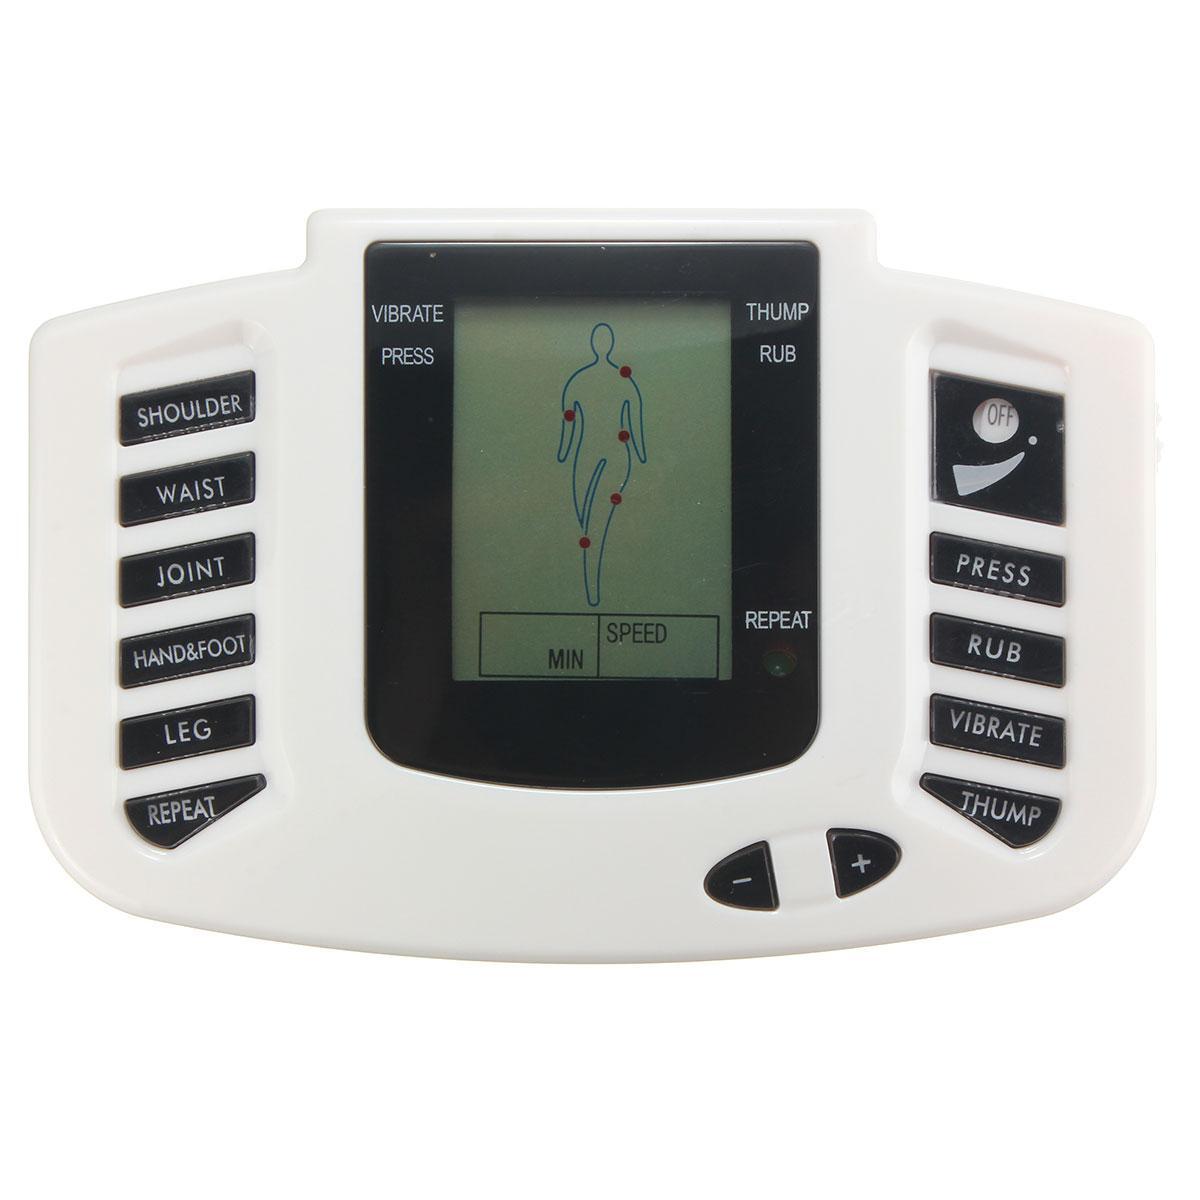 Digital Pulse Massage Acupuncture Therapy Machine in Pakistan - Tens Digital Therapy Machine Full Body Massager Muscle Pain Relief Acupuncture